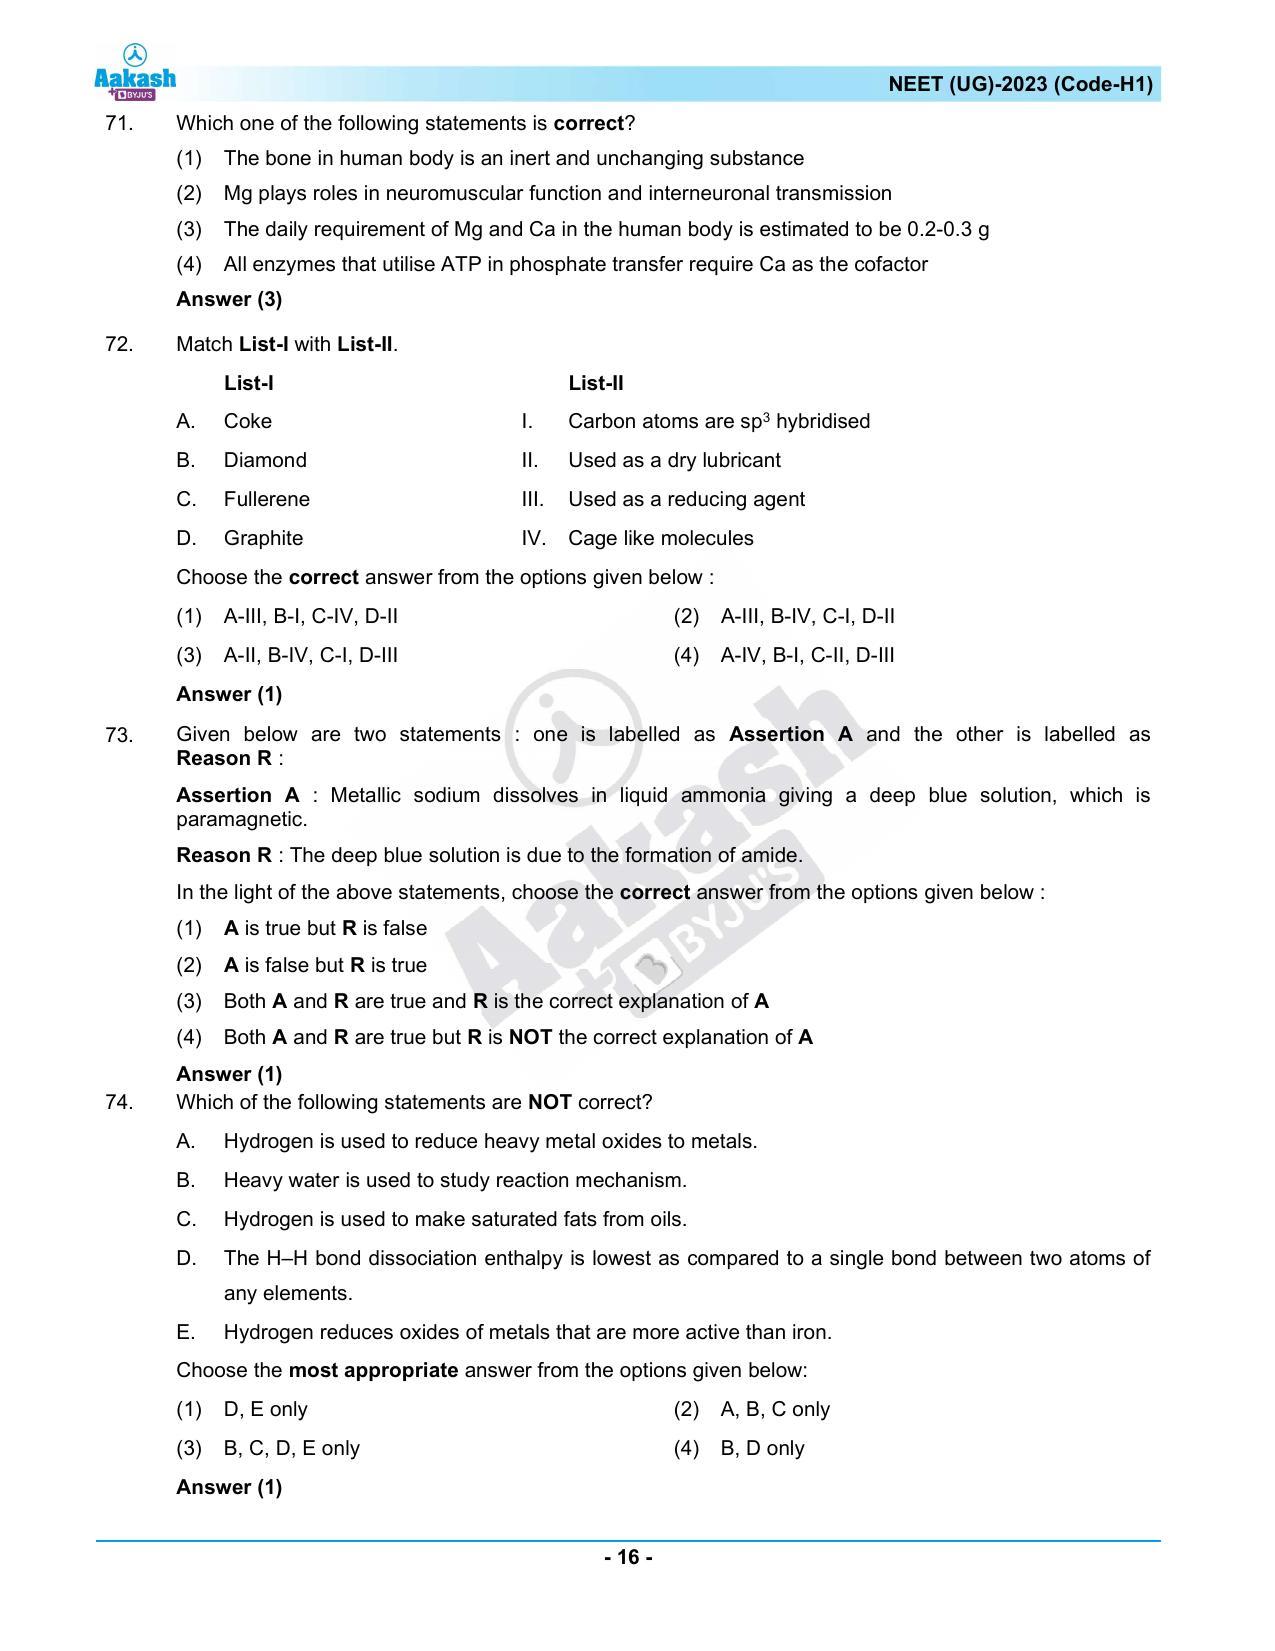 NEET 2023 Question Paper H1 - Page 16